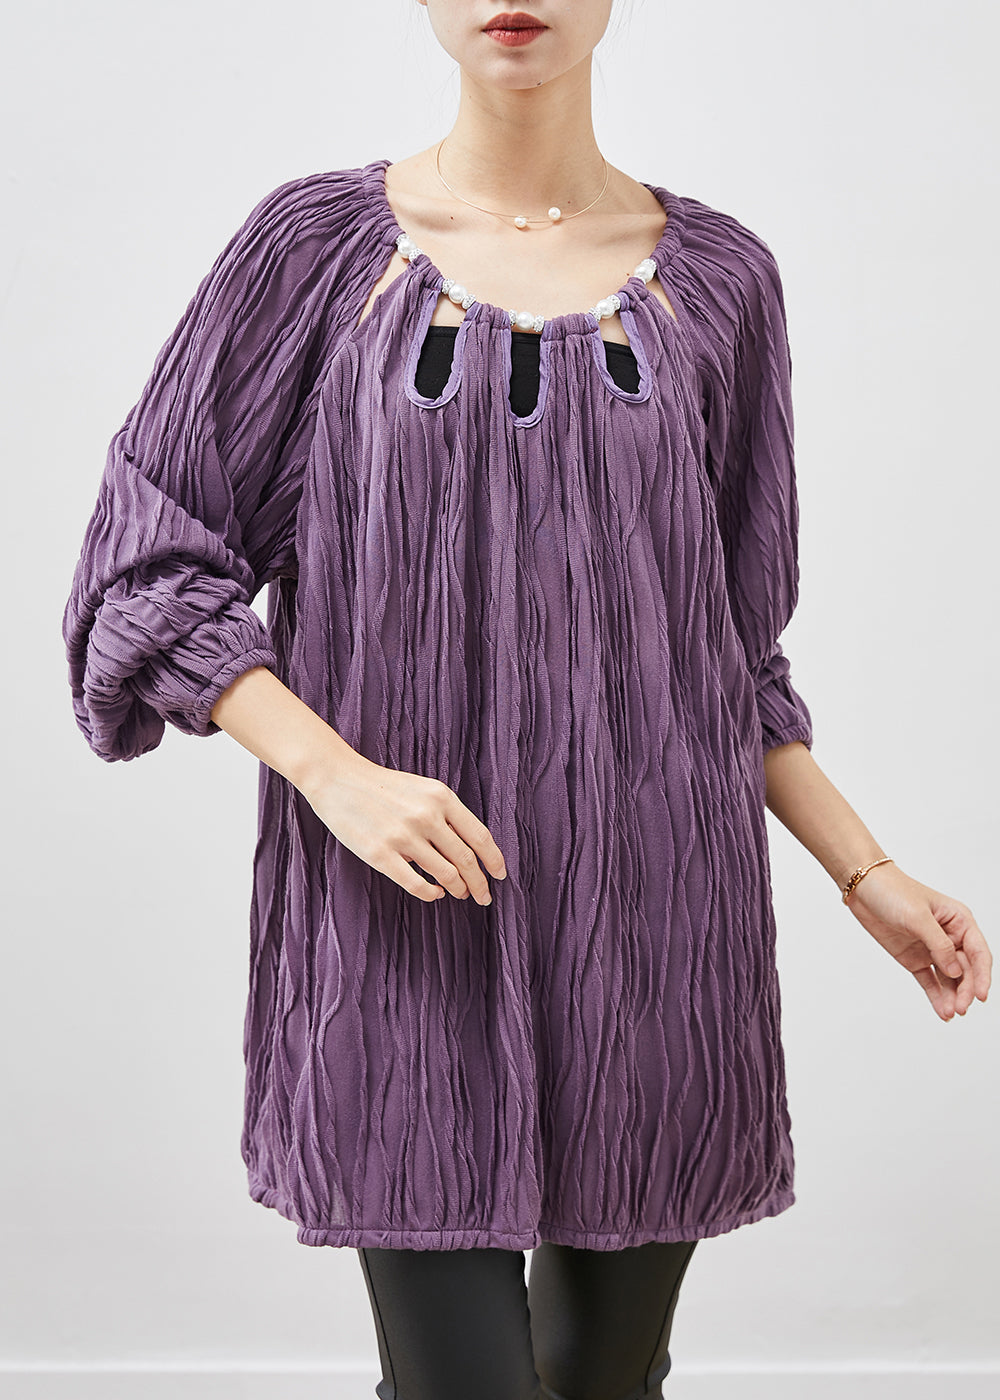 Simple Purple Nail Bead Hollow Out Cotton Shirt Spring